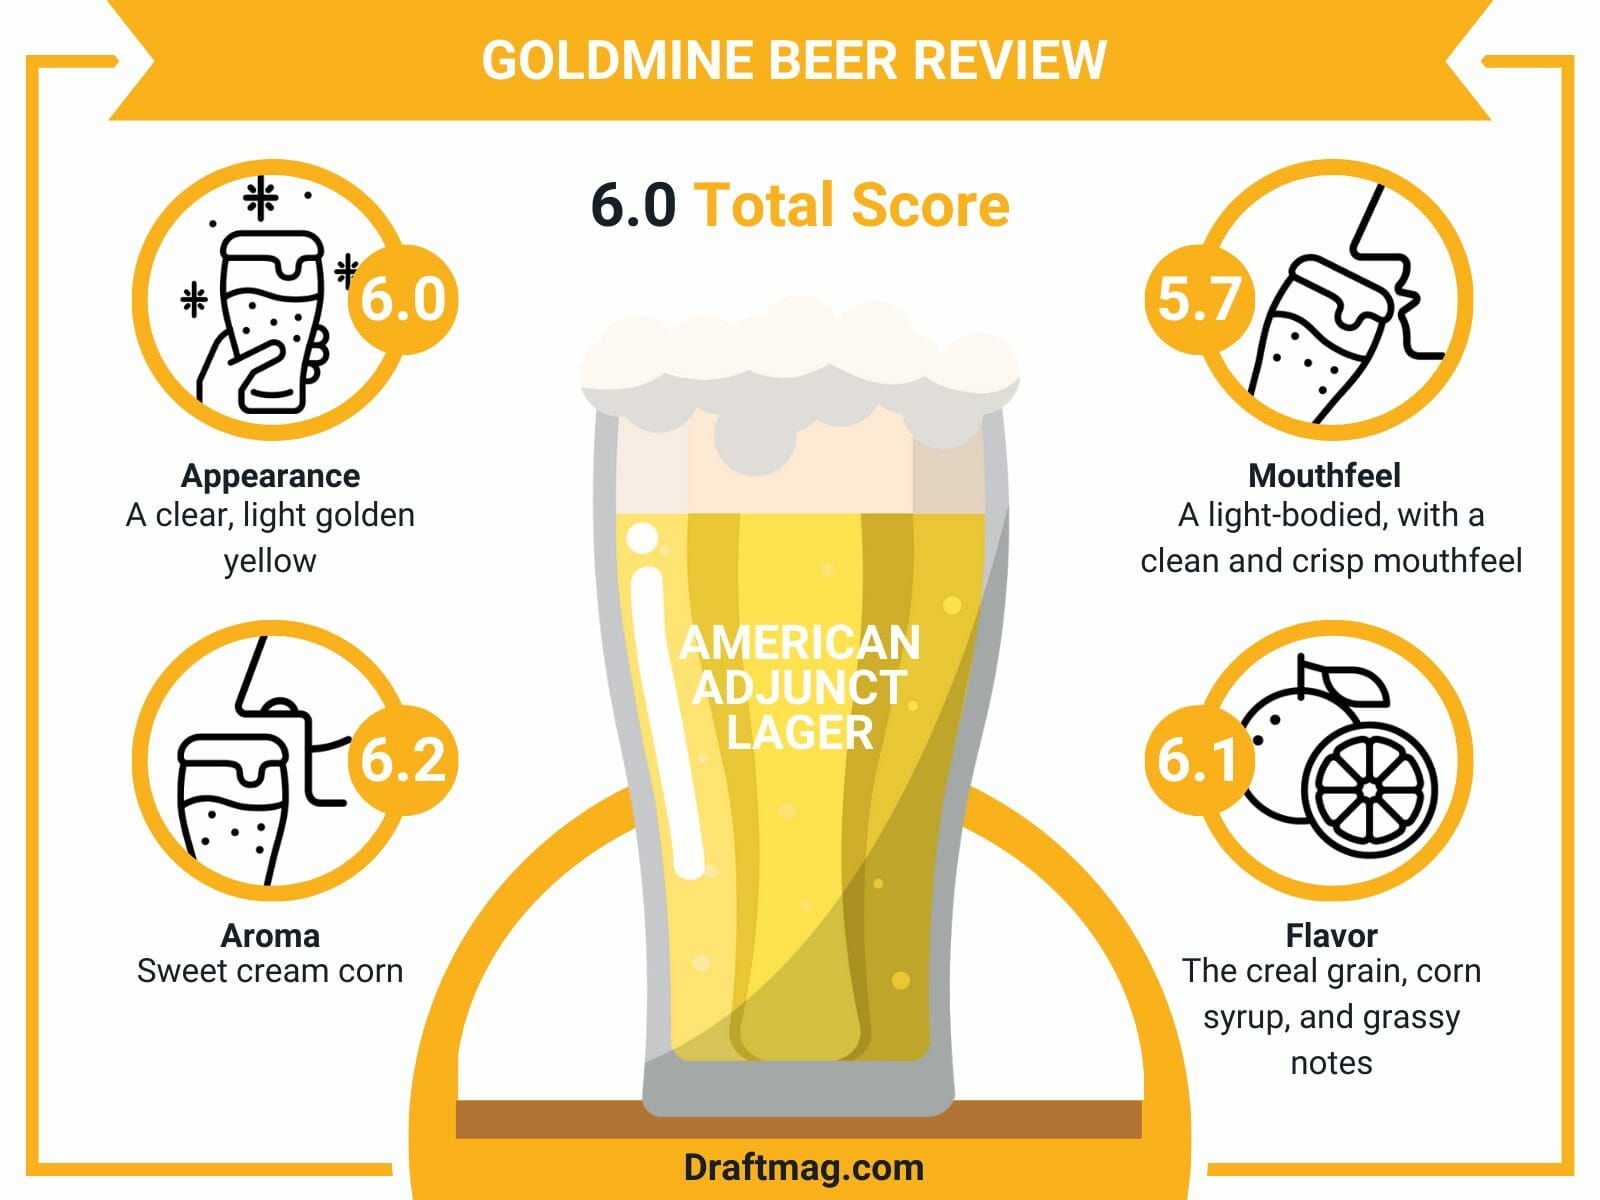 Goldmine beer review infographic